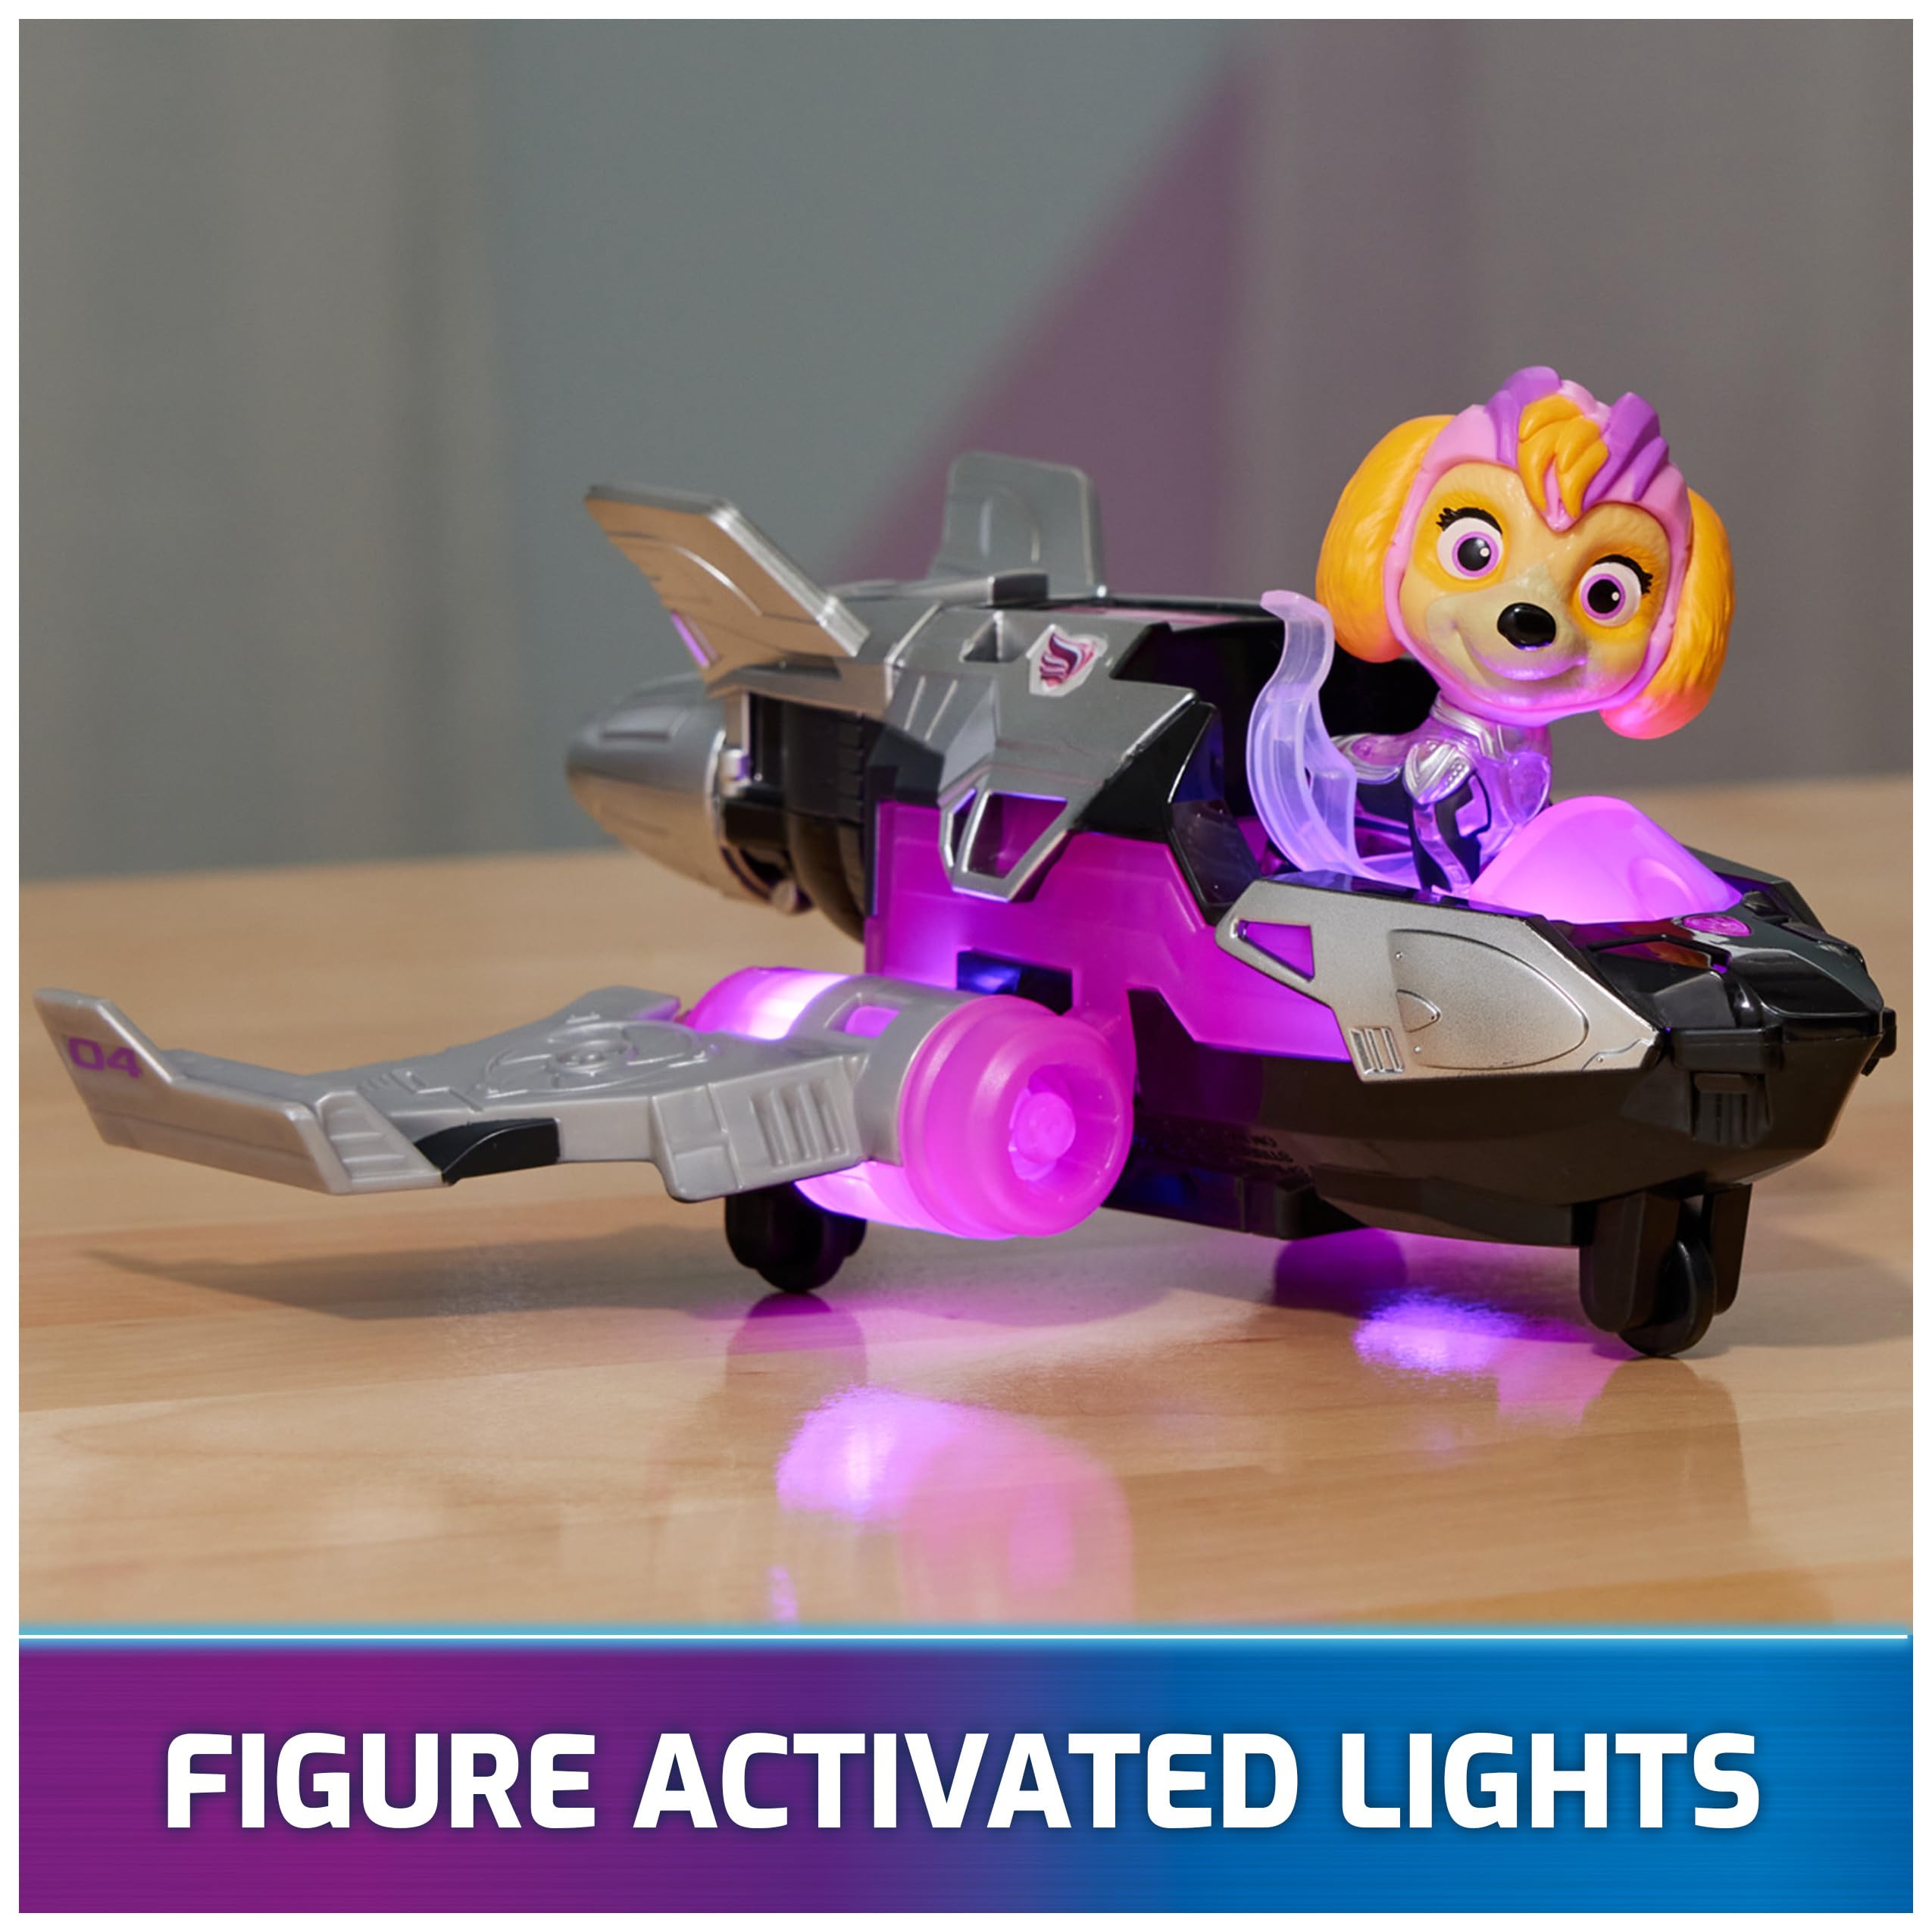 Paw Patrol: The Mighty Movie, Airplane Toy with Skye Mighty Pups Action Figure, Lights and Sounds, Kids Toys for Boys & Girls 3+